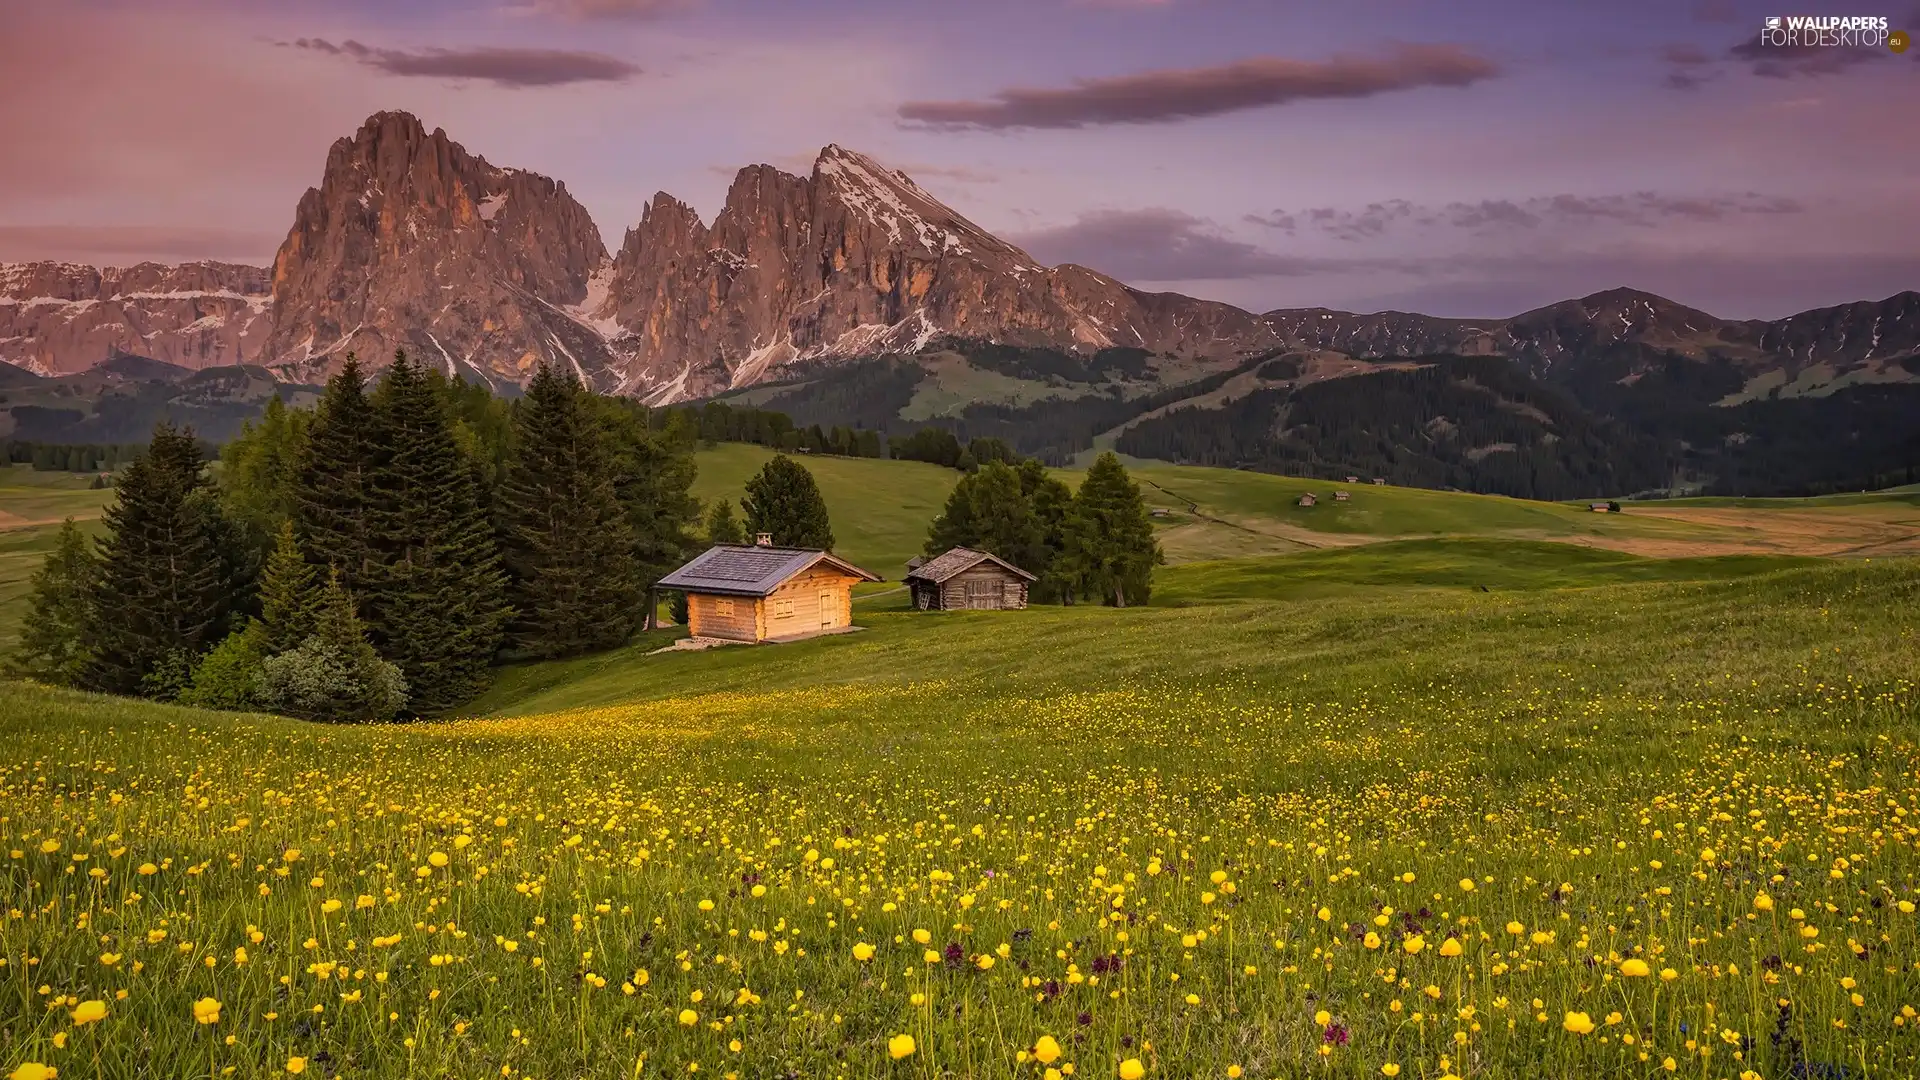 clouds, trees, Flowers, Seiser Alm Meadow, Italy, Houses, Sassolungo Mountains, wood, Valley, Dolomites, viewes, Meadow, Val Gardena